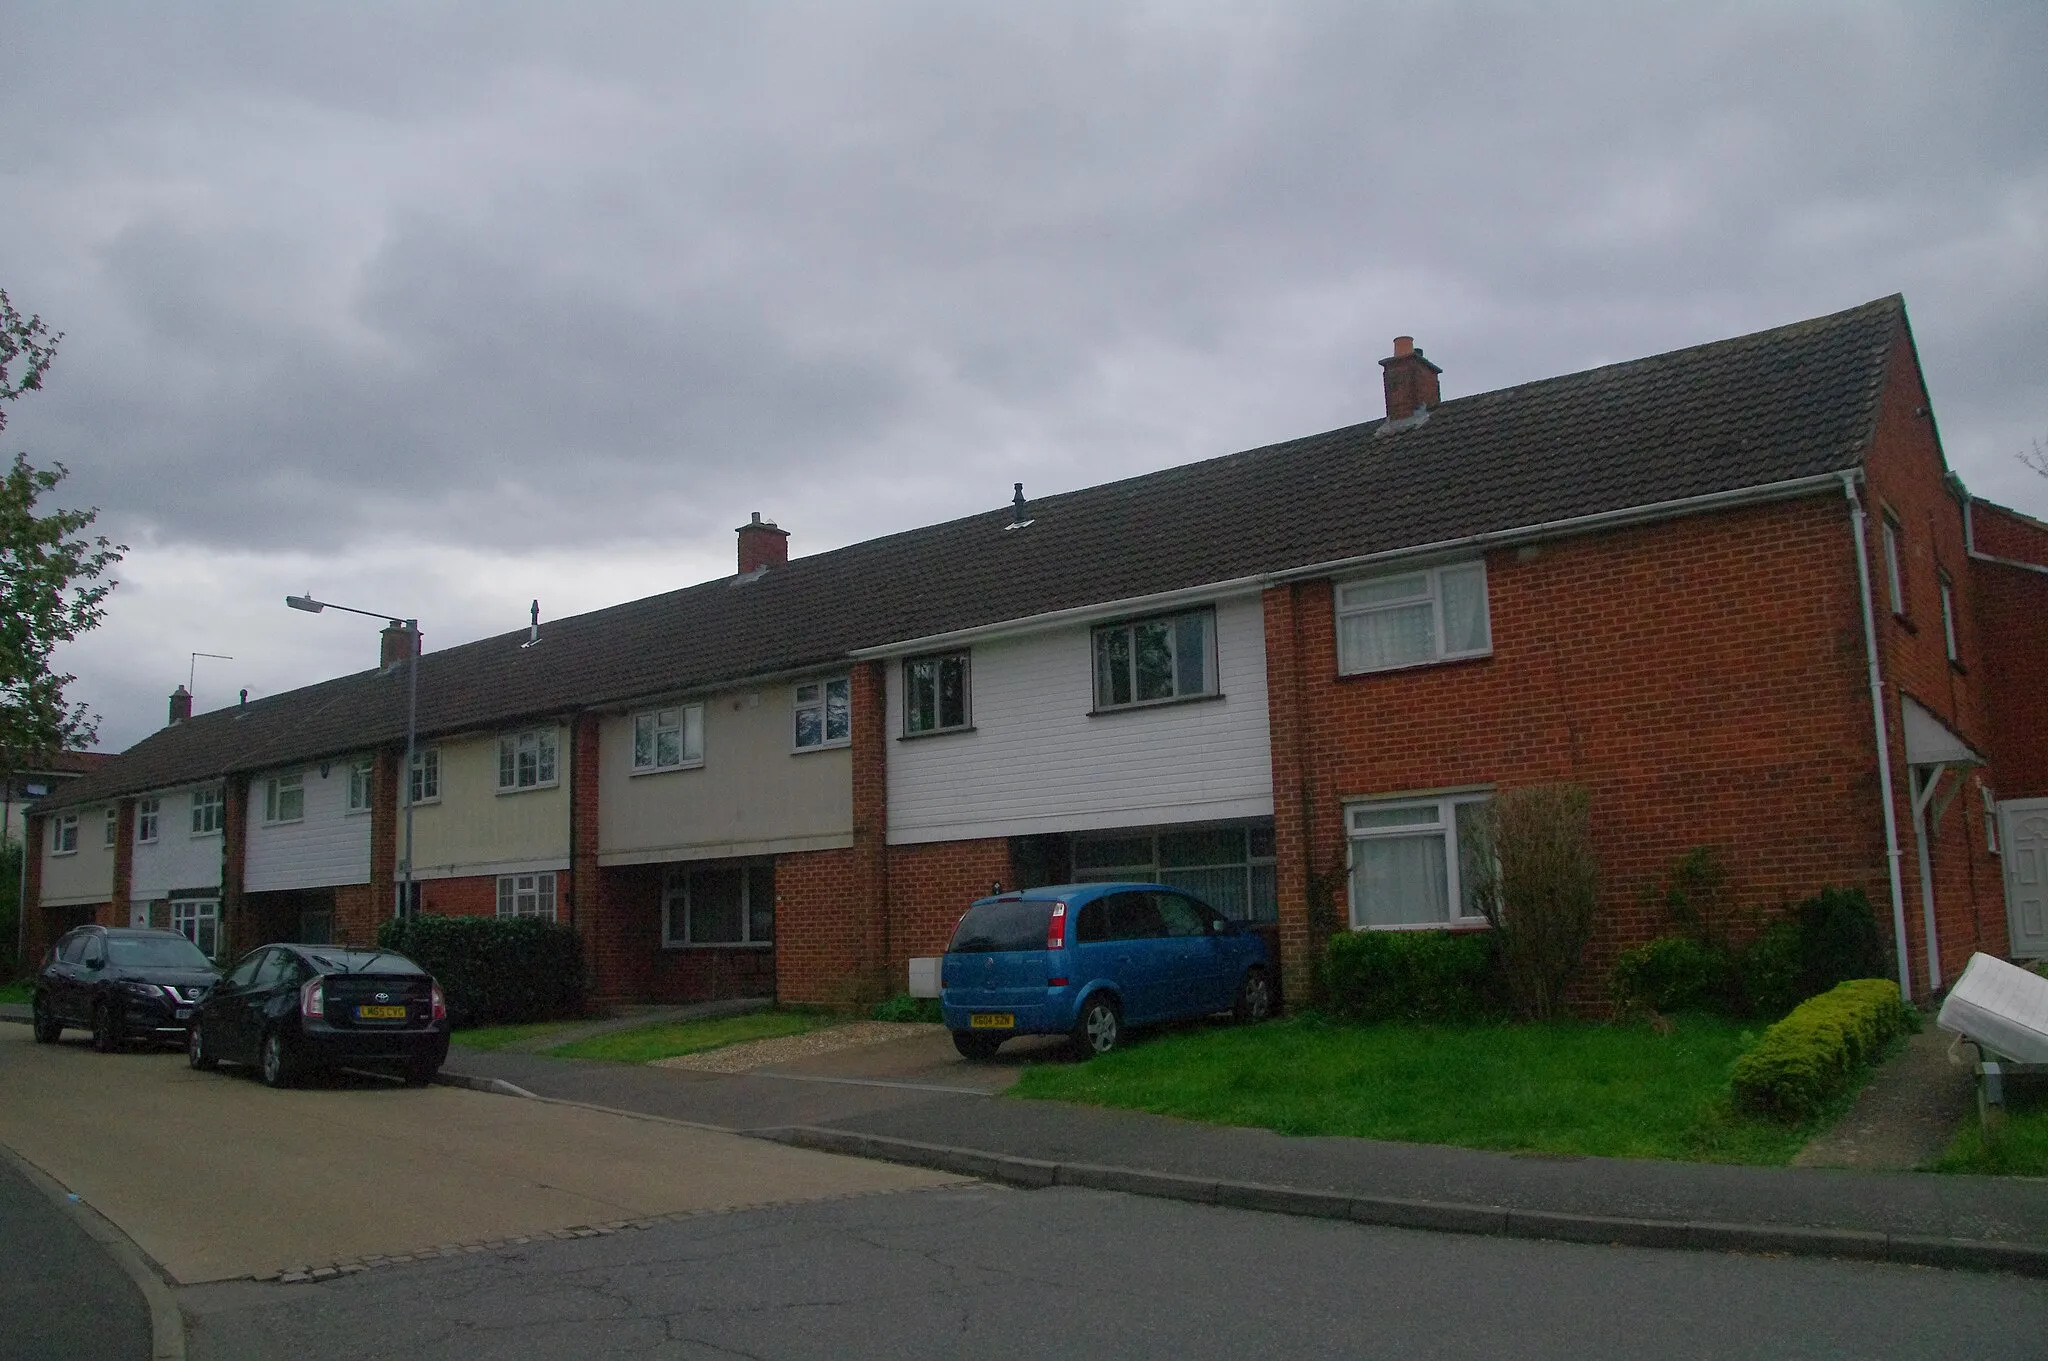 Photo showing: Terraced housing in Hare Street Springs, Harlow Essex